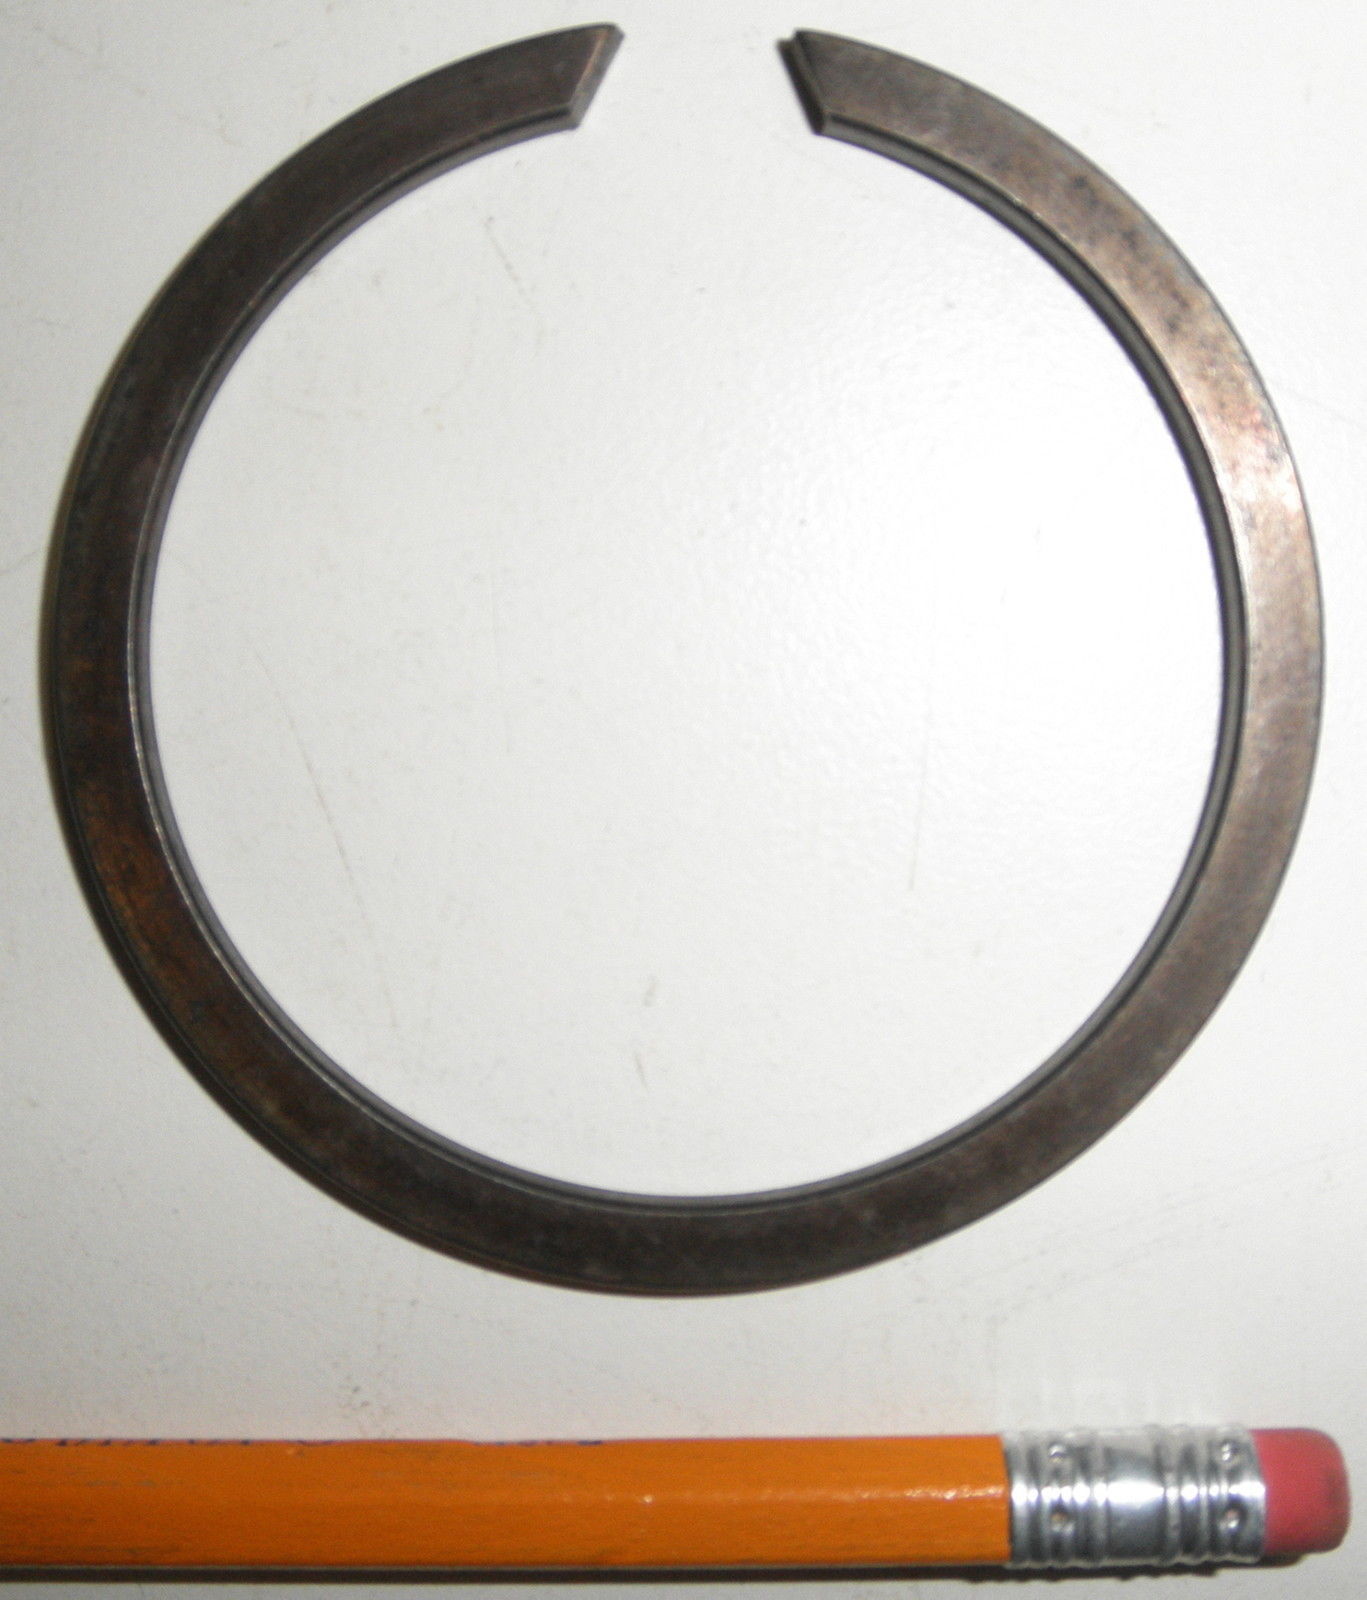 Snap Ring Retaining Circlip, 5325-00-514-1706, Twin Disc A2622C, Military spec means top quality, US steel, 5340-00-499-1217, 004991217, A2622C, Oshkosh ARFF, A/S32P-23, Oshkosh P-23, P-23R, C7D10